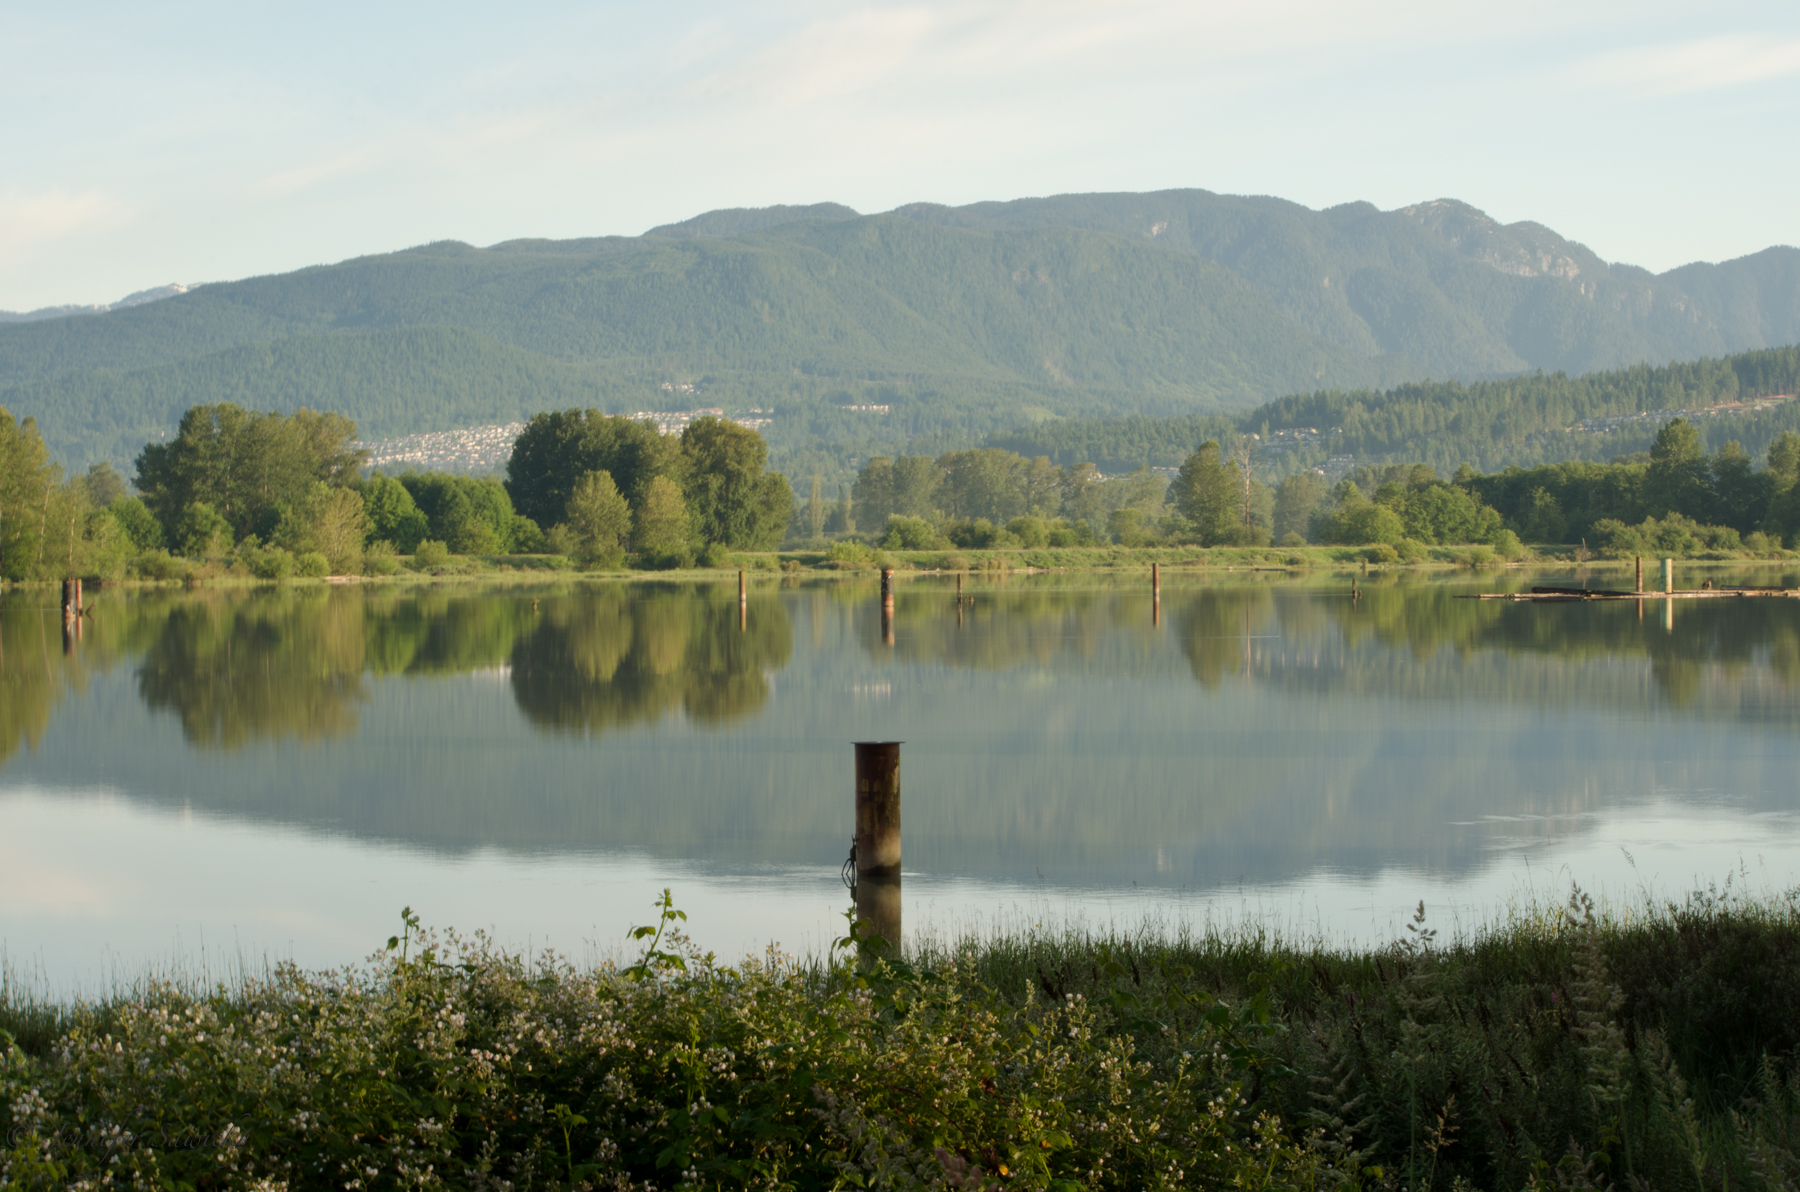 Coquitlam in the distance, June 2013 1/10, f22, ISO100, 55mm